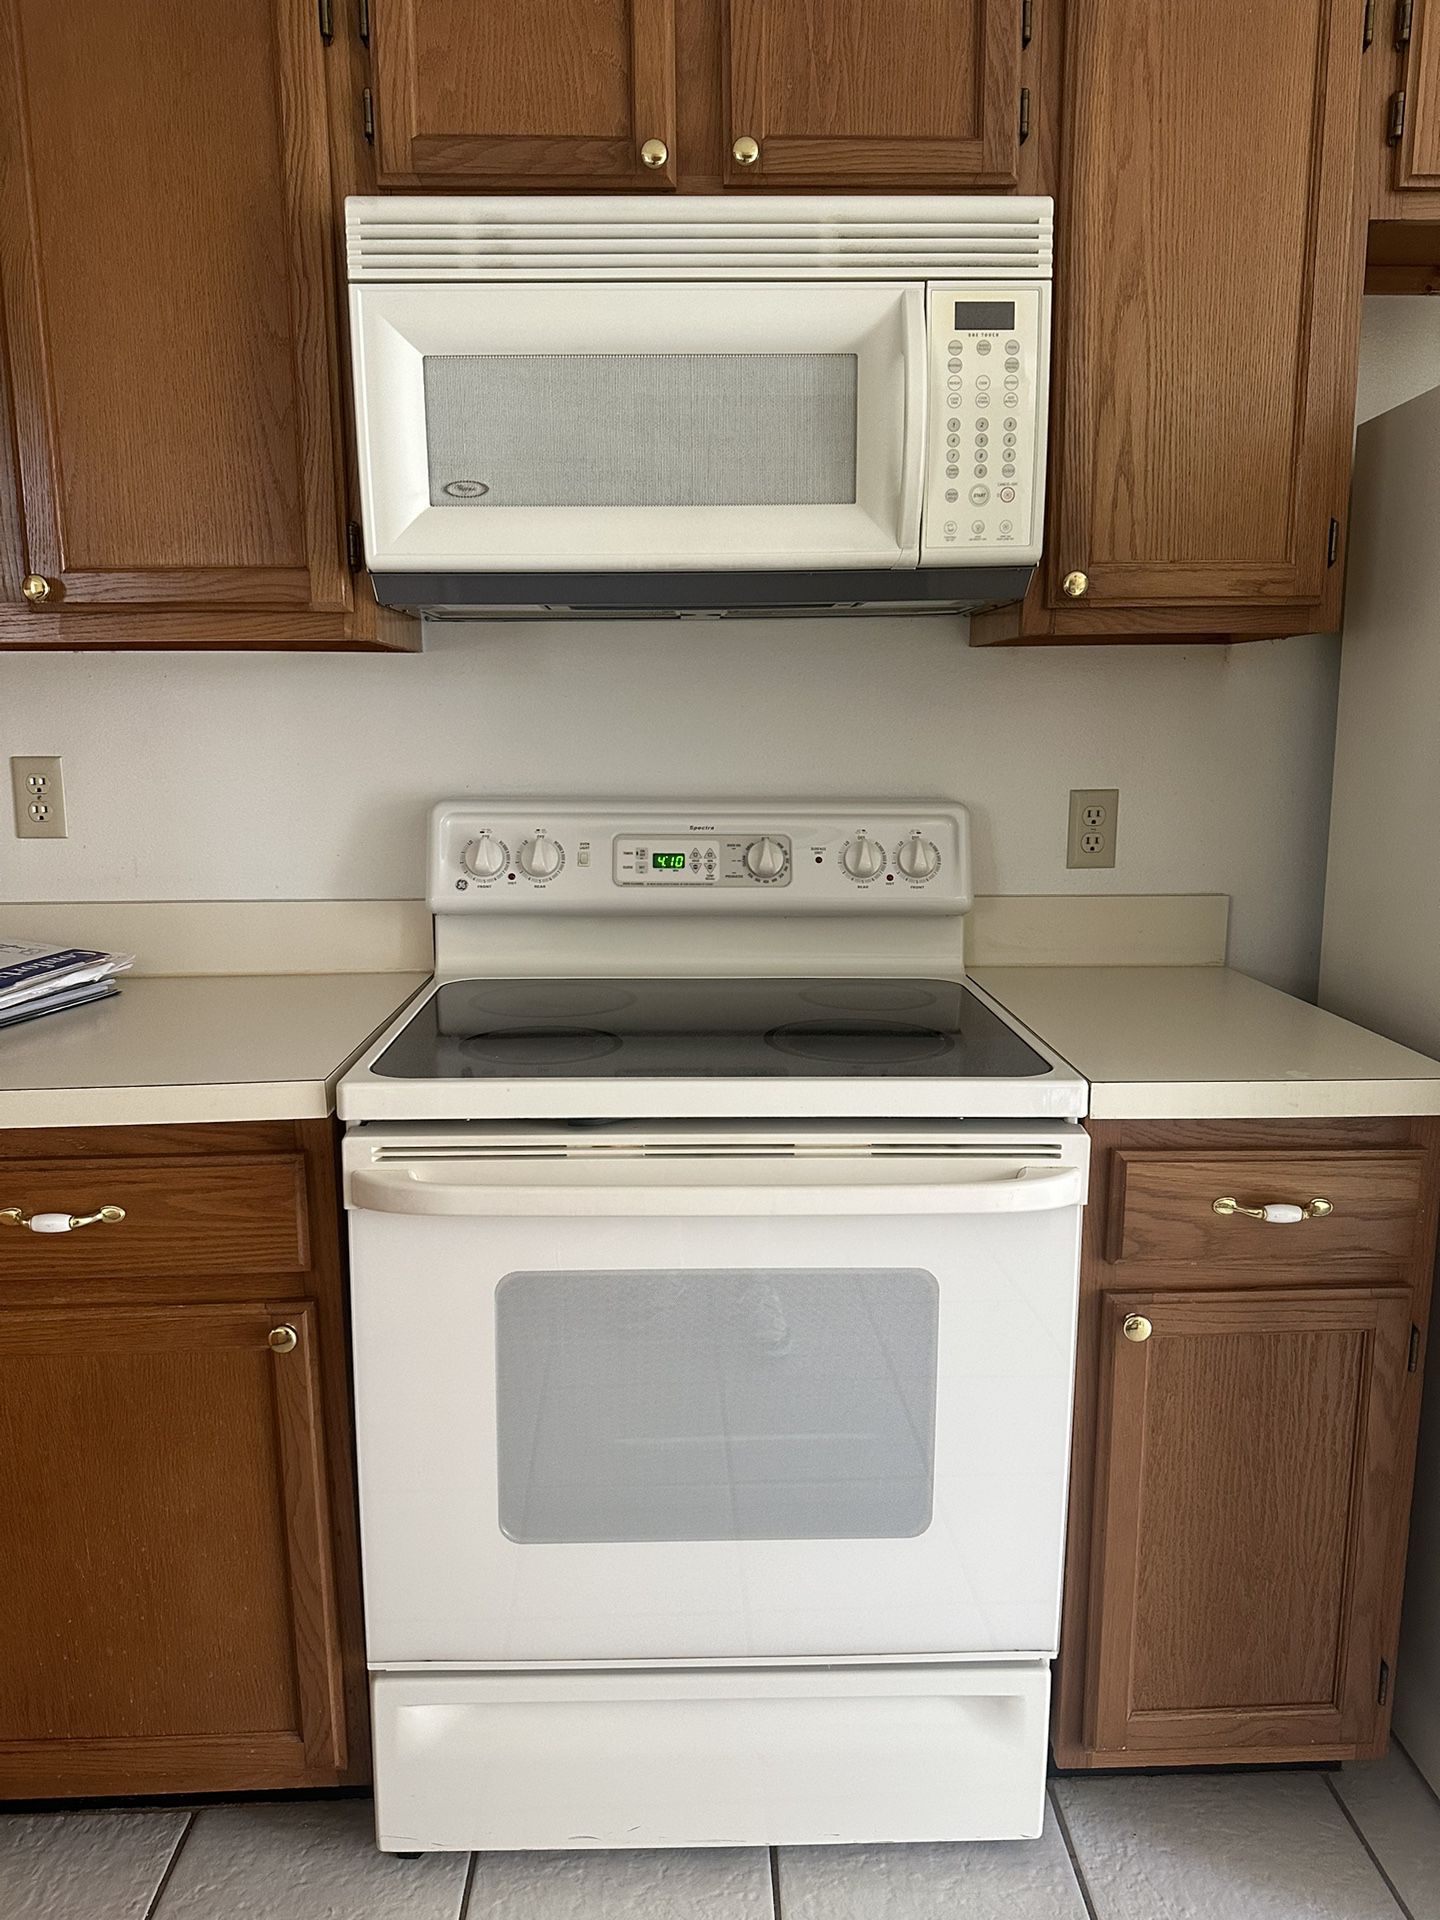 Refrigerator, Oven, and Microwave 